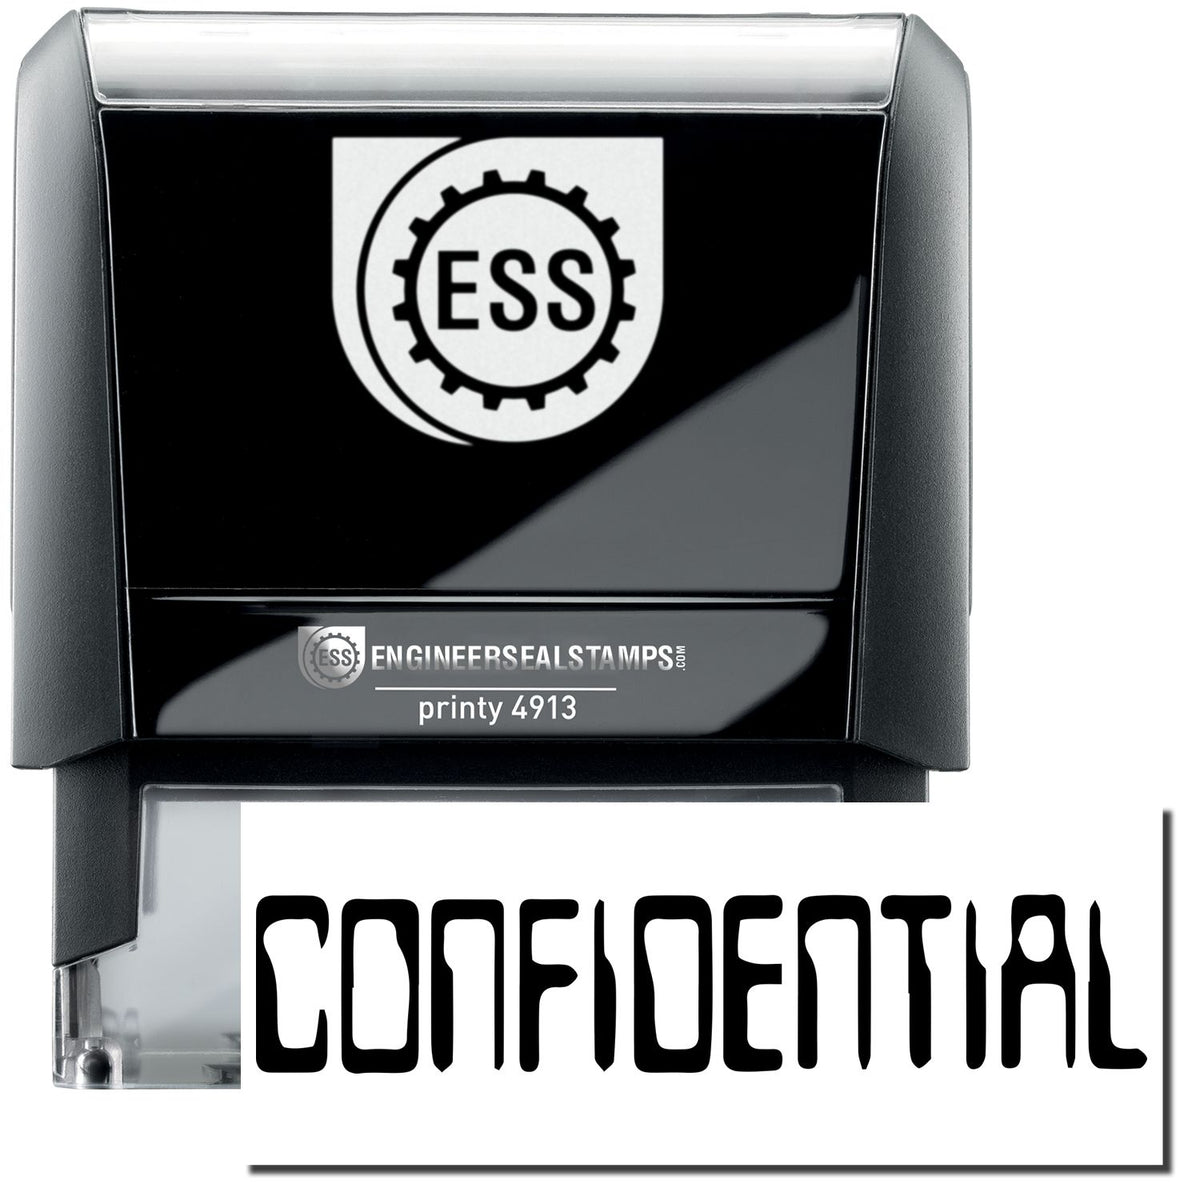 A self-inking stamp with a stamped image showing how the text &quot;CONFIDENTIAL&quot; in a large barcode font is displayed by it after stamping.